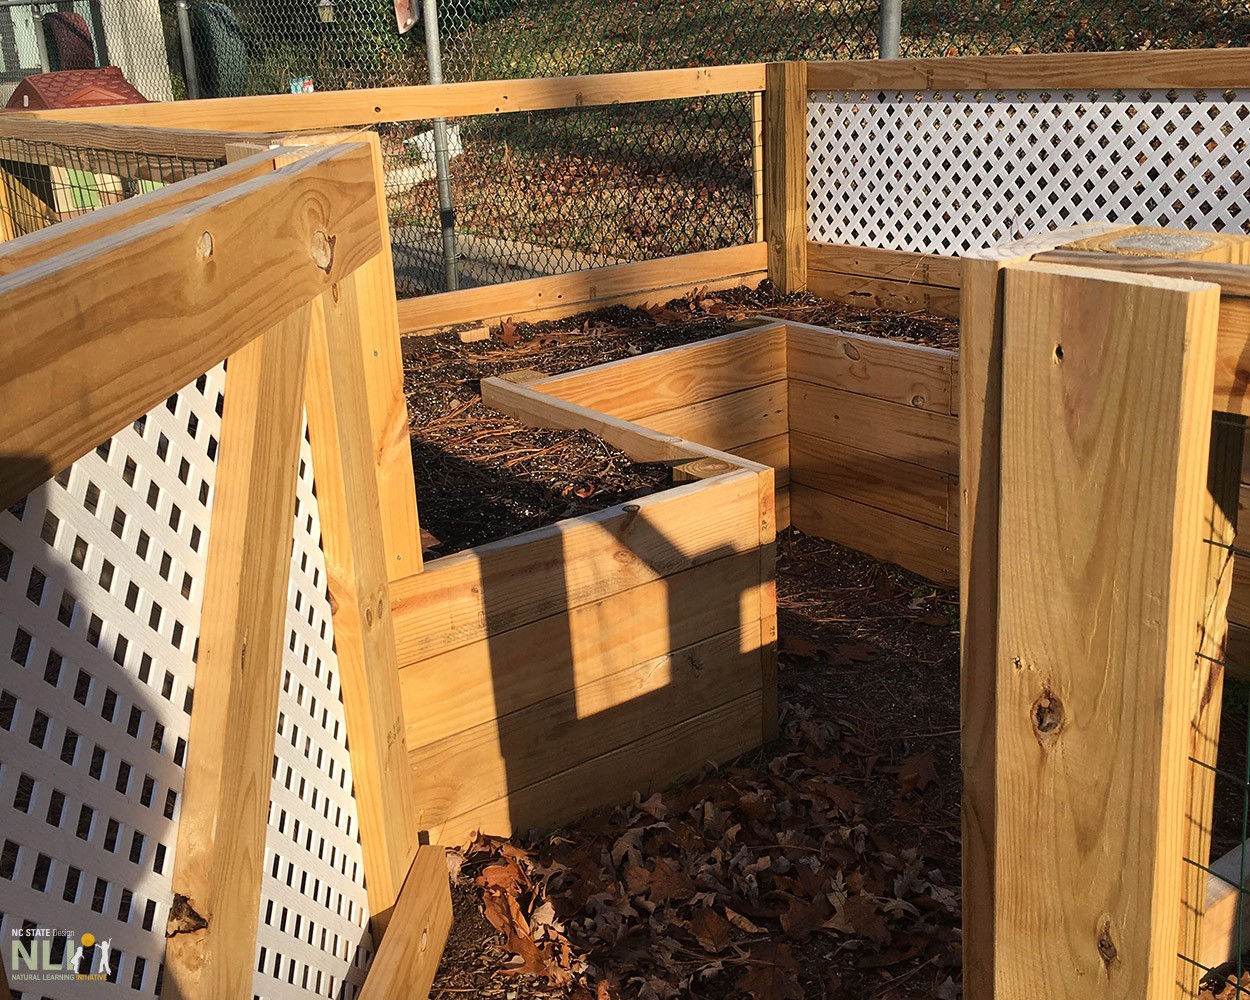 after renovation showing raised garden beds